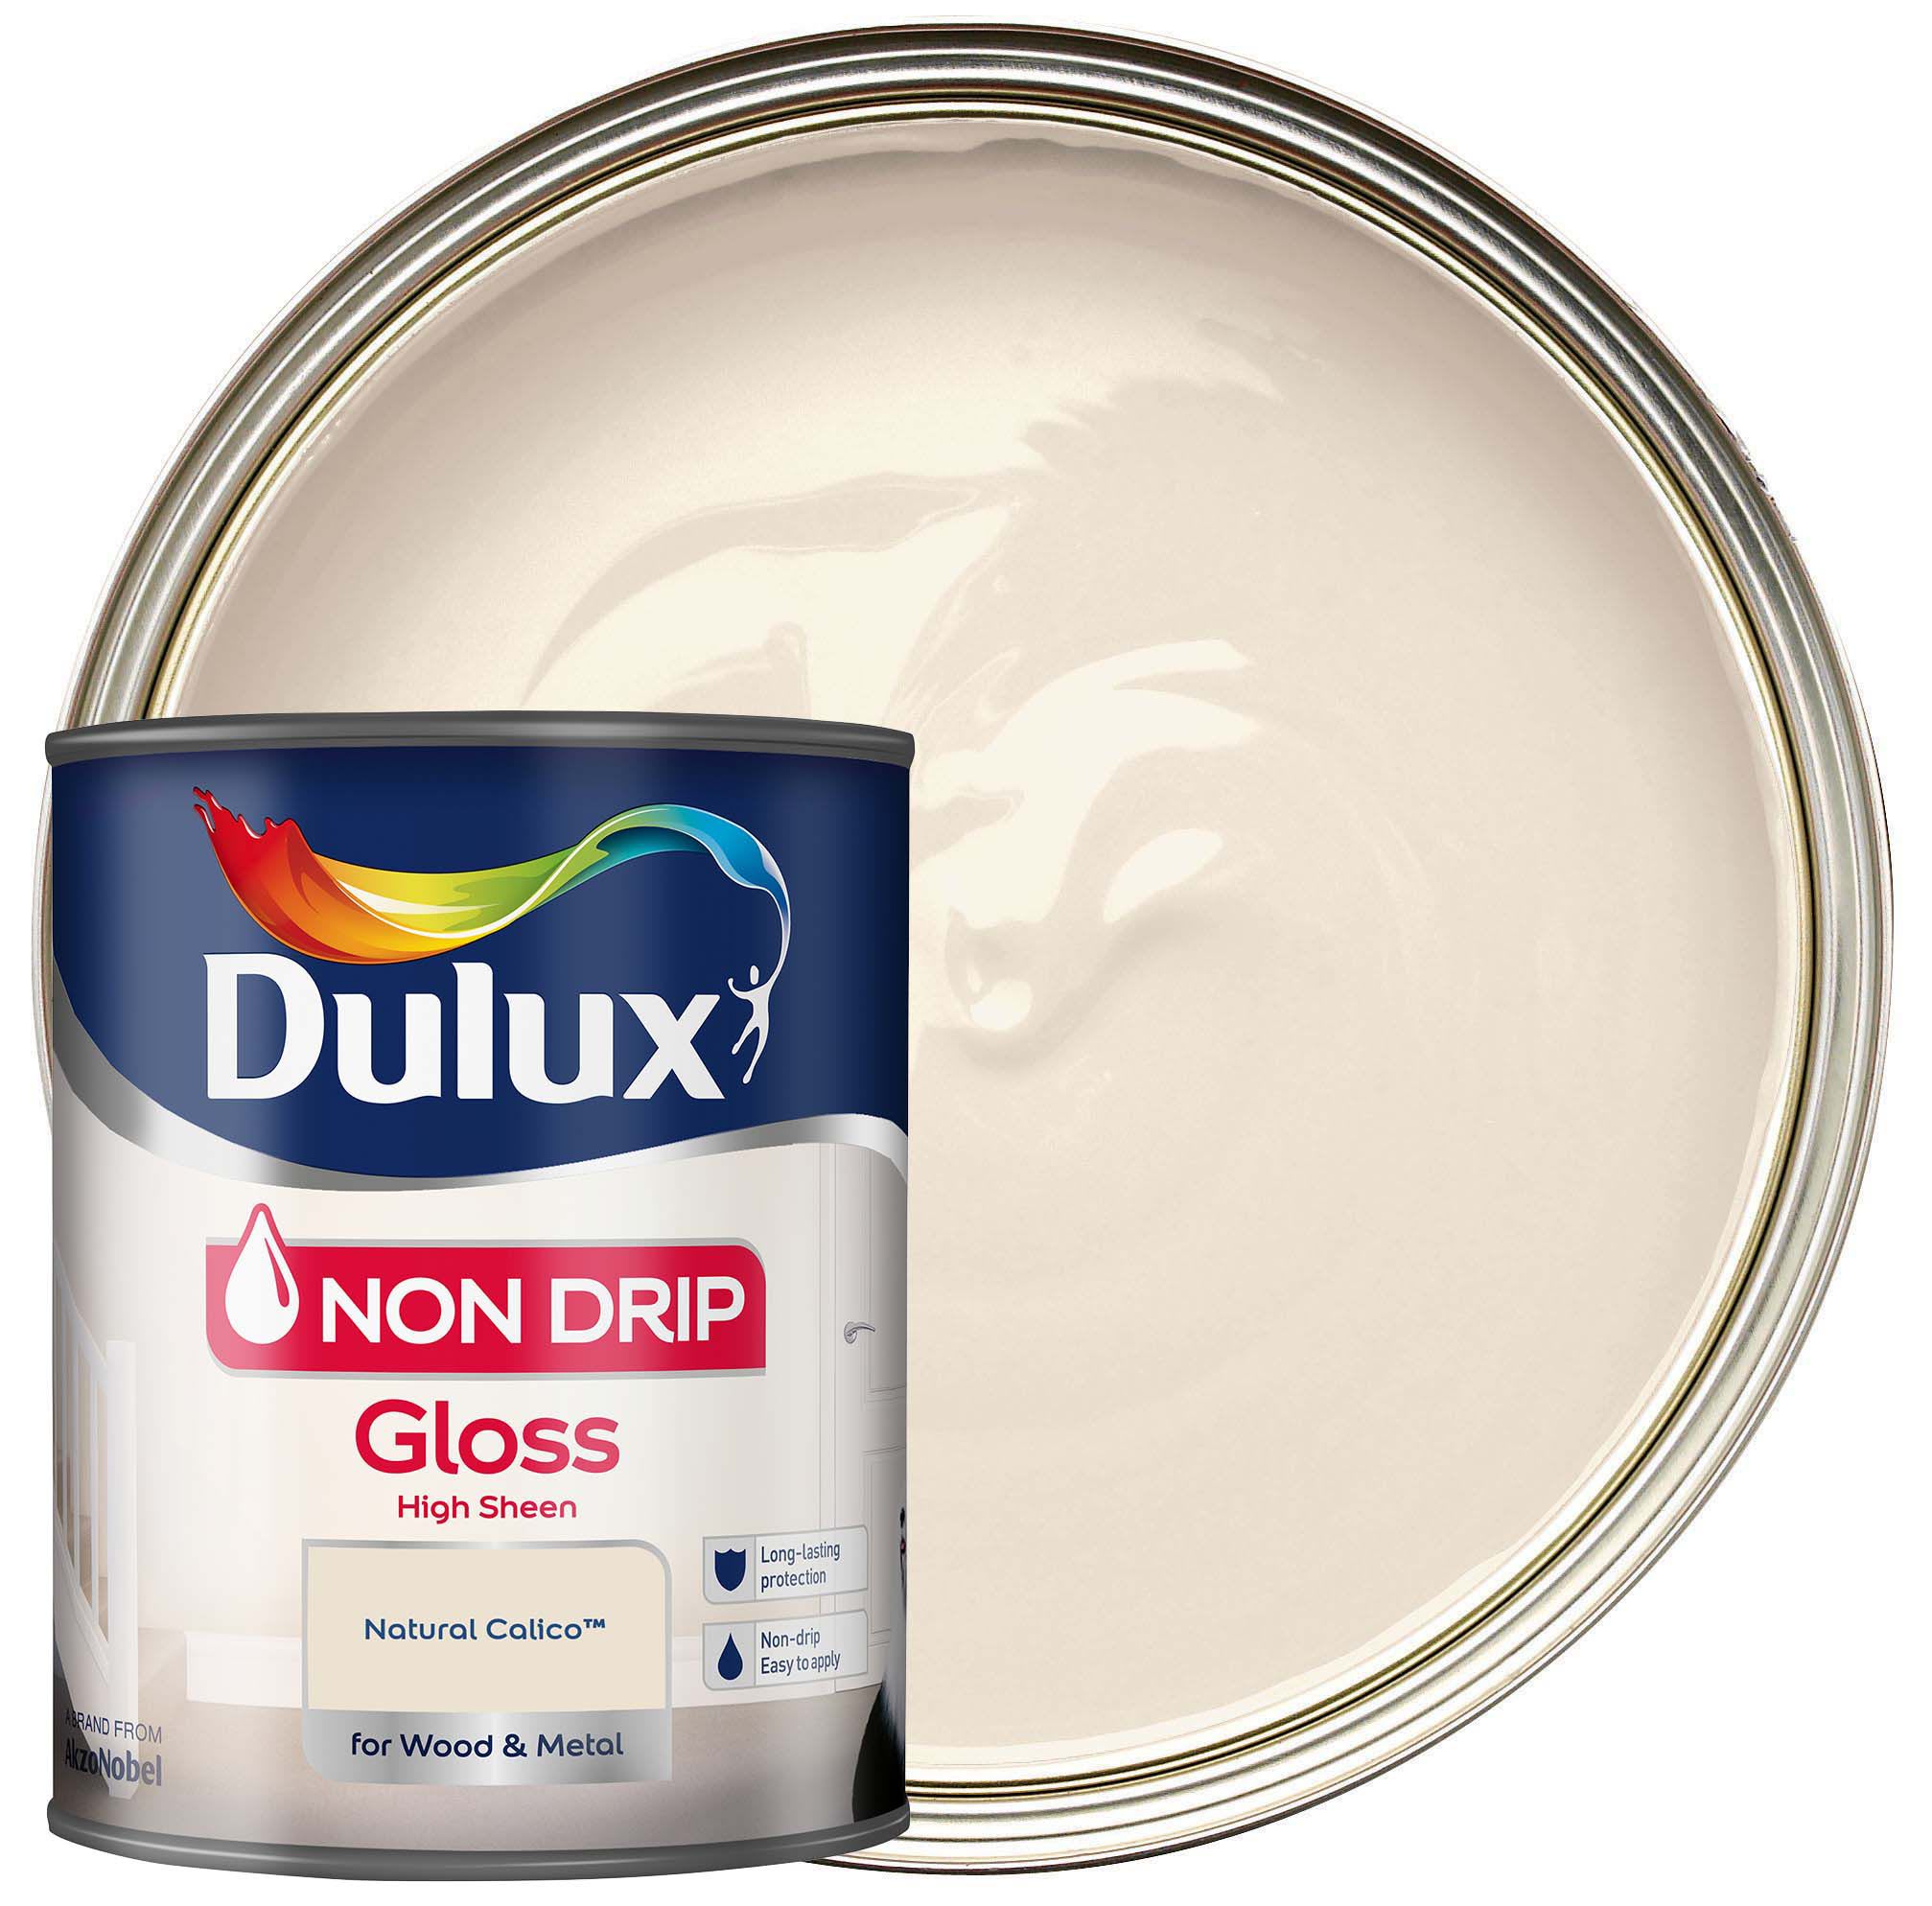 Dulux Non Drip Gloss Paint - Natural Calico